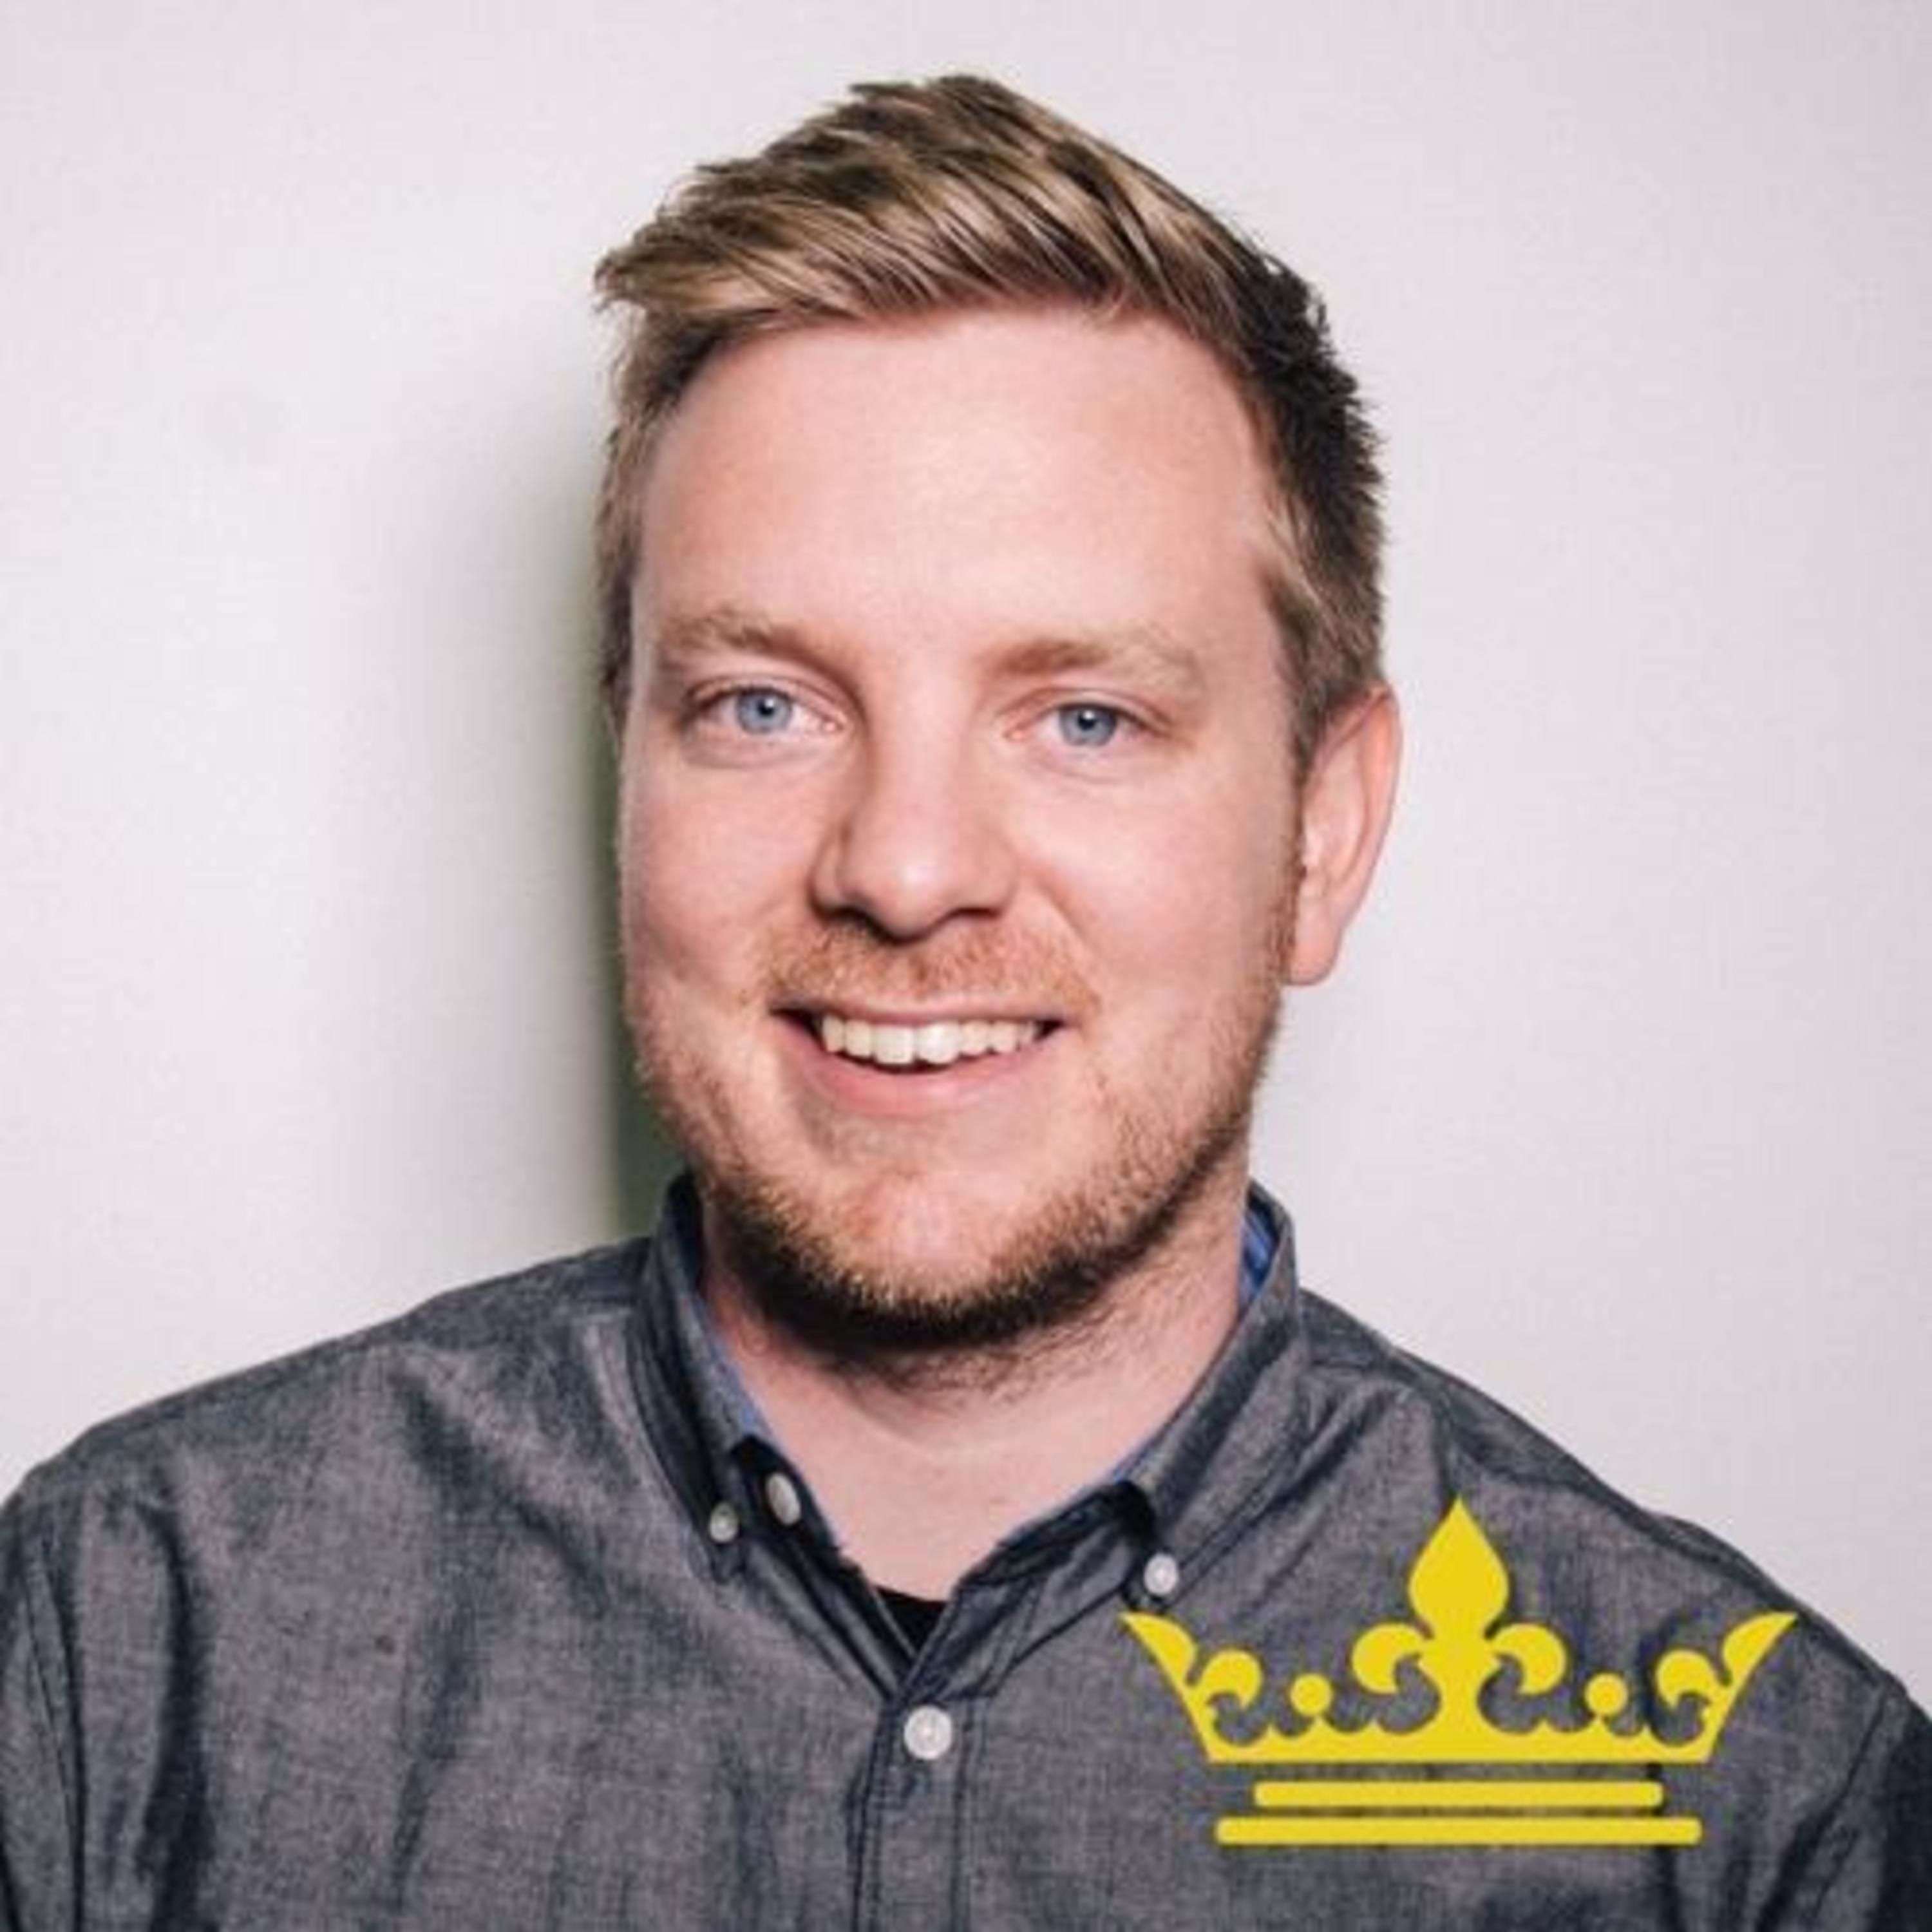 56: Wes Bos - Getting Things Done and Building Your Own Tools